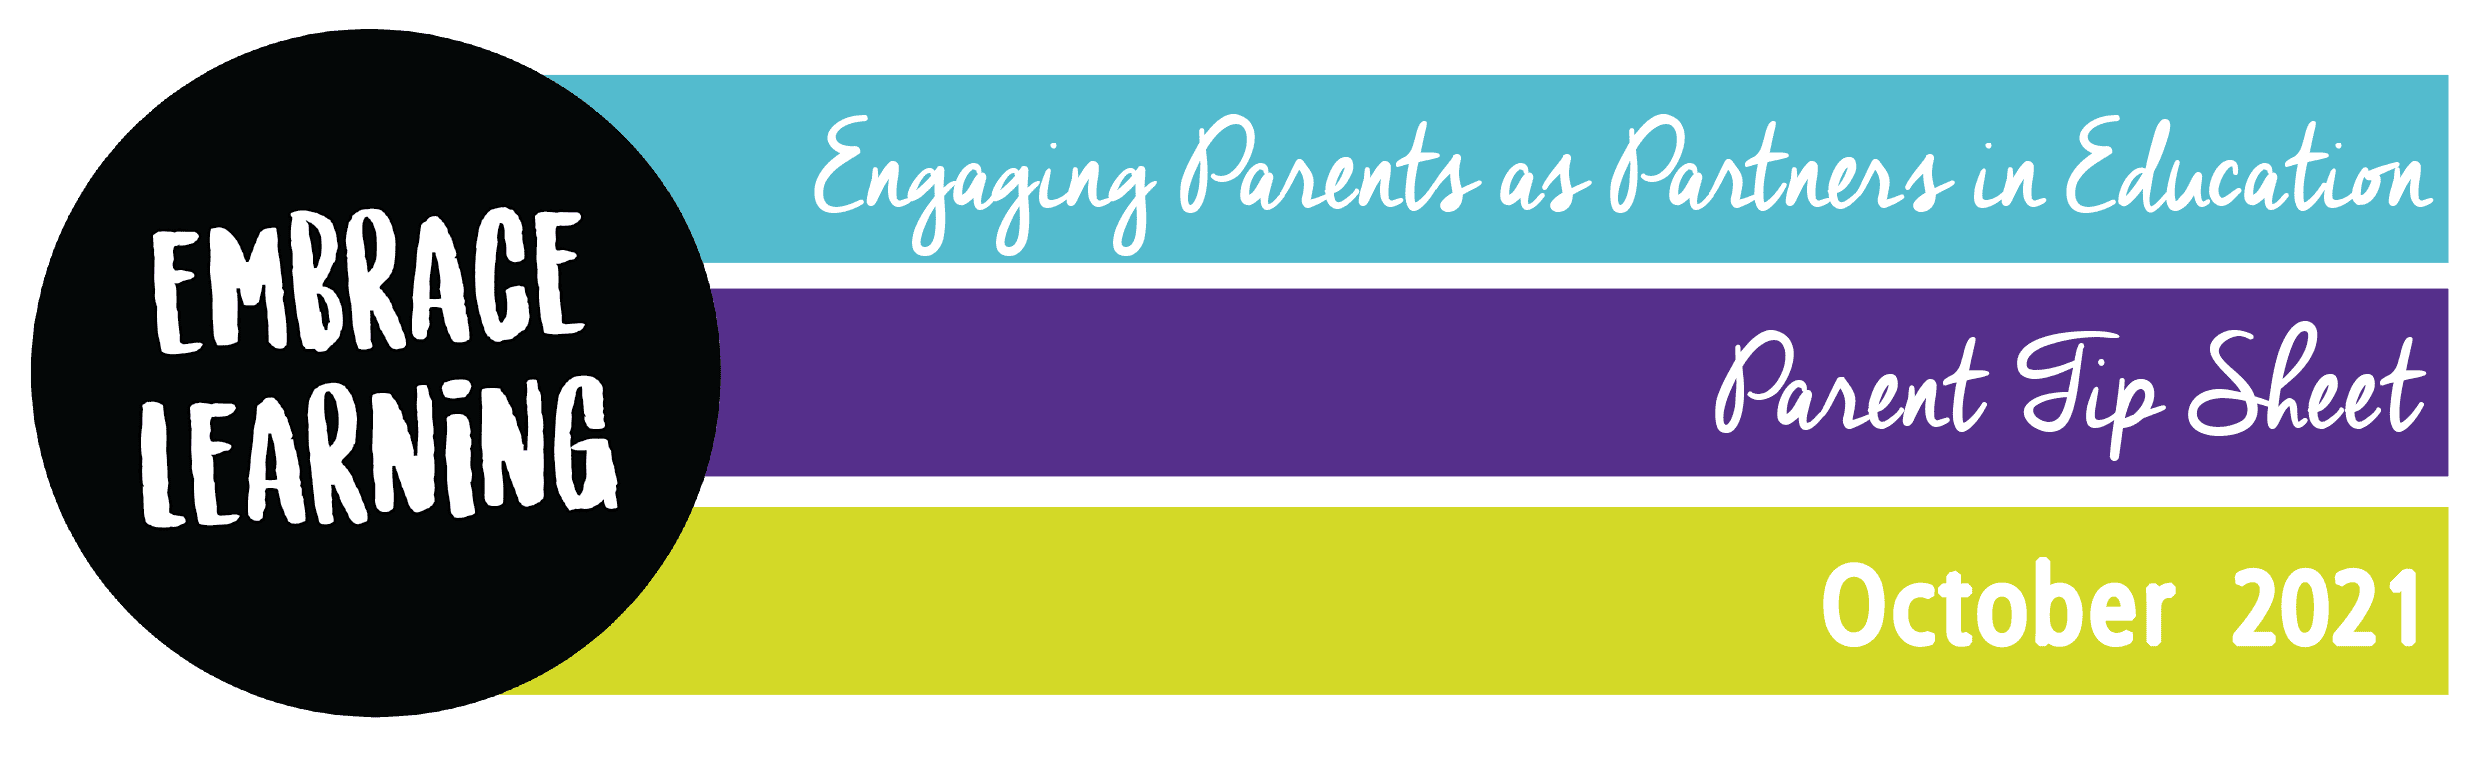 Engaging Parents as Partners in Education Parent Tip Sheet October 2021